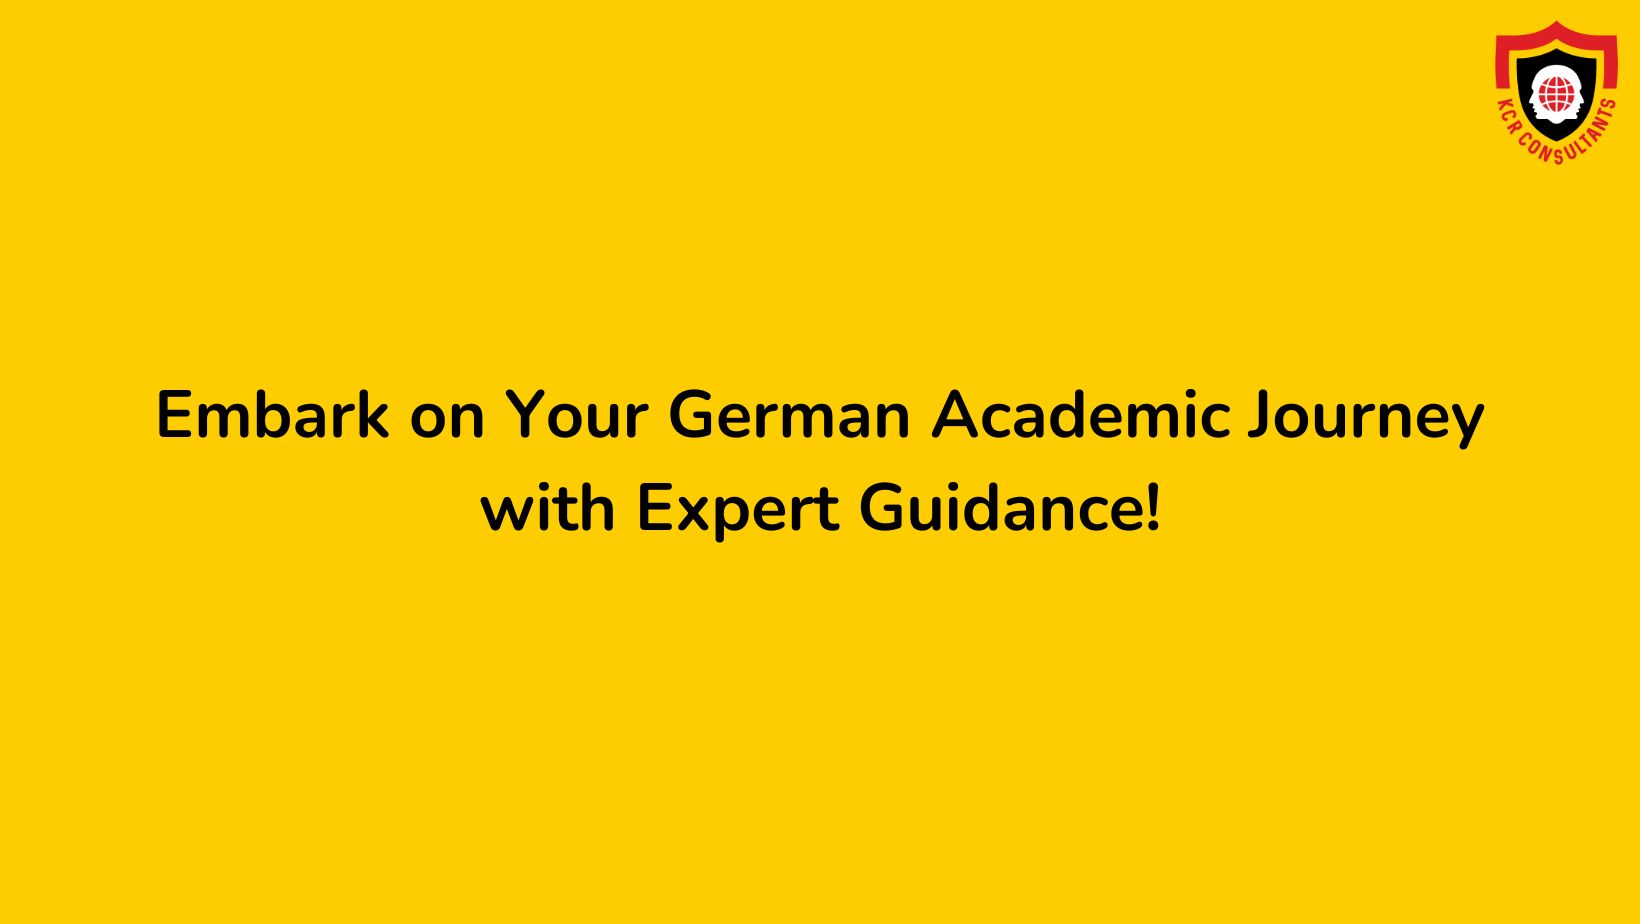 The best German education consultant - KCR CONSULTANTS